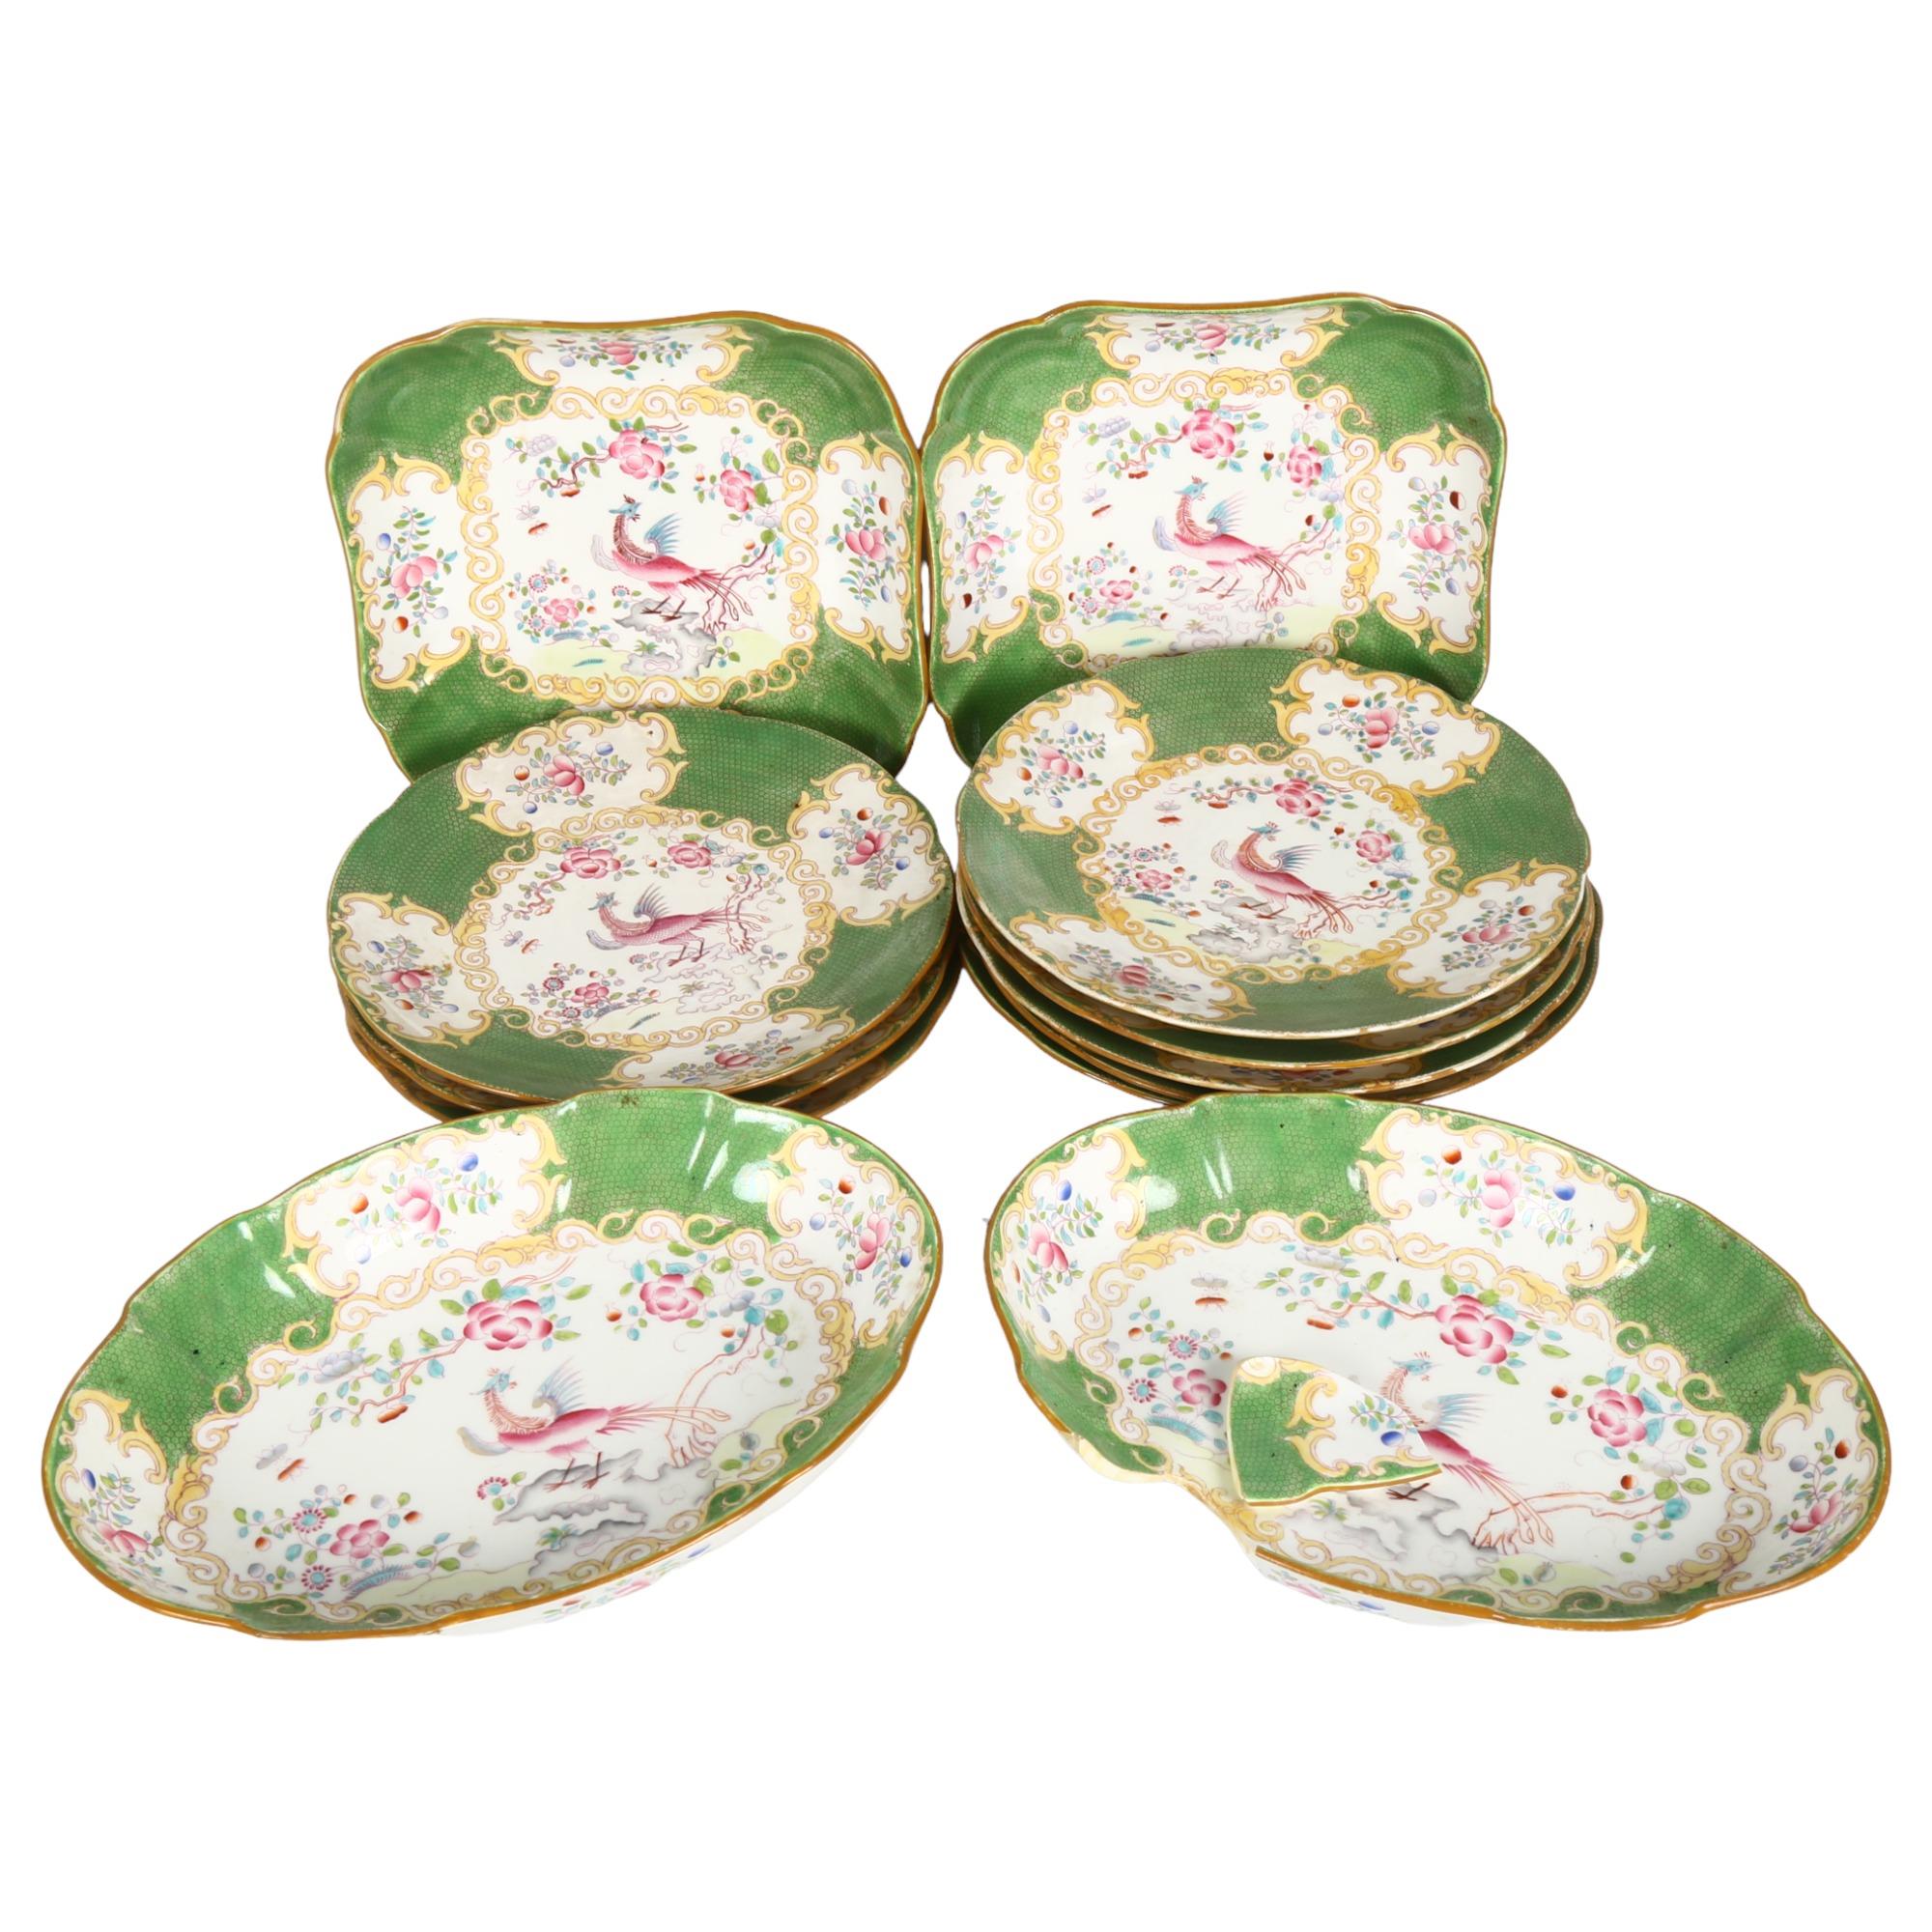 An Edwardian Minton's dessert set, comprising 8 plates and 4 serving dishes, with bird of paradise